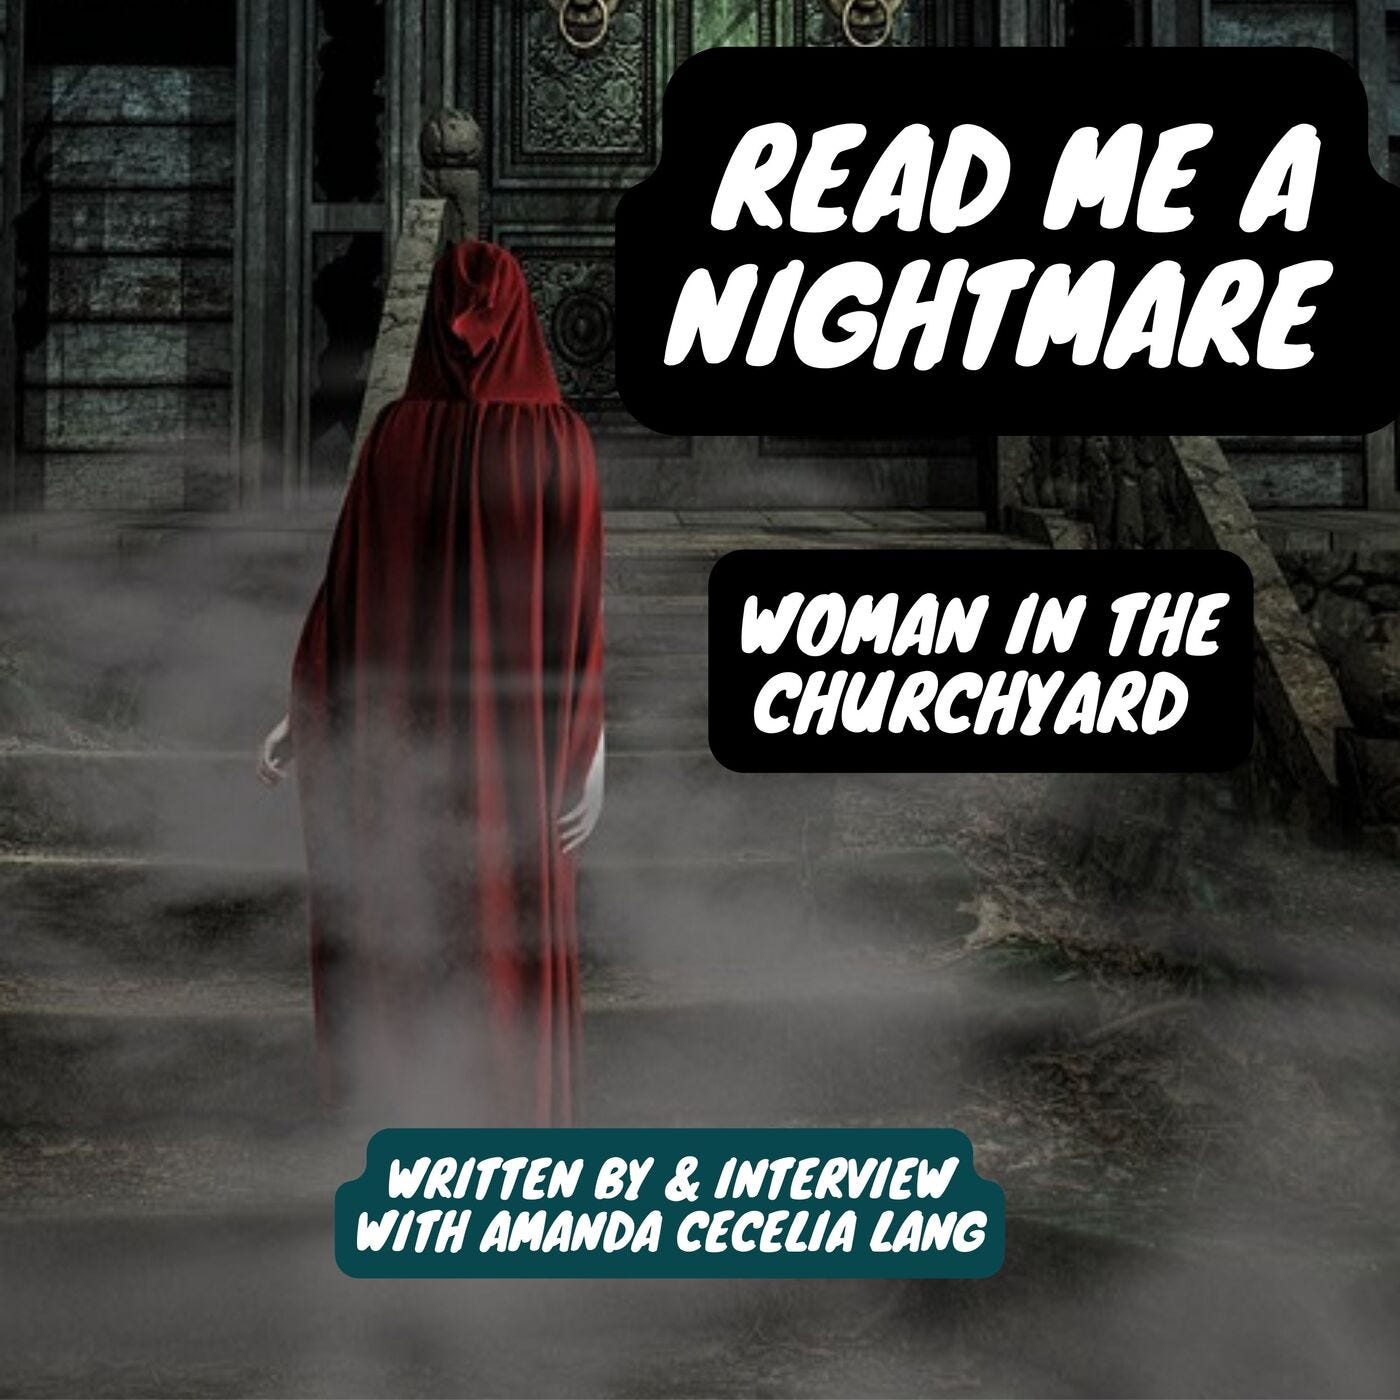 35 The Woman in the Churchyard & Interview with Amanda Cecelia Lang